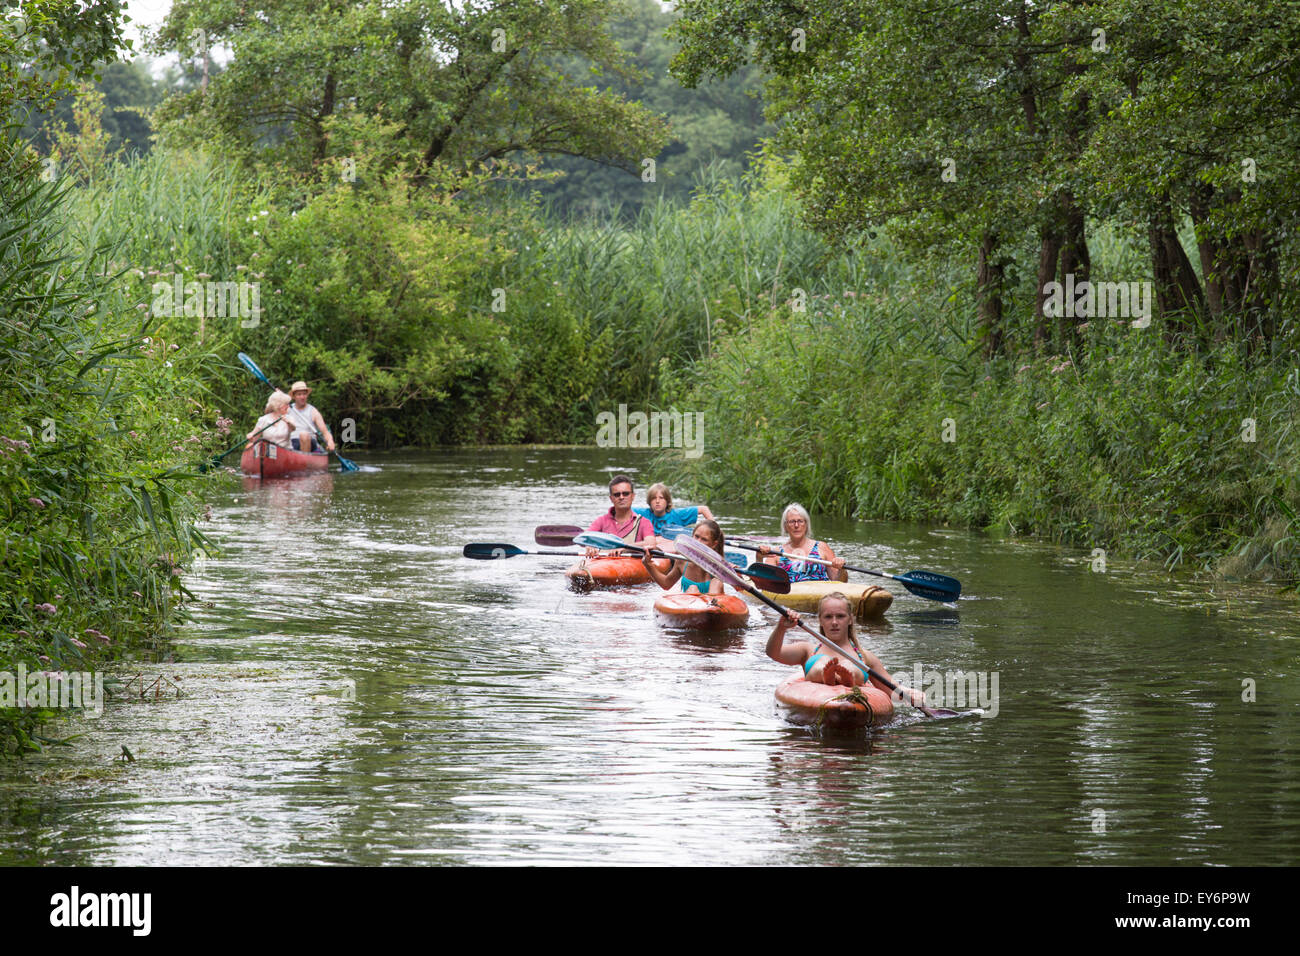 Group of canoeing and kayaking tourists passing at meandering river the 'Dommel' in the Netherlands Stock Photo